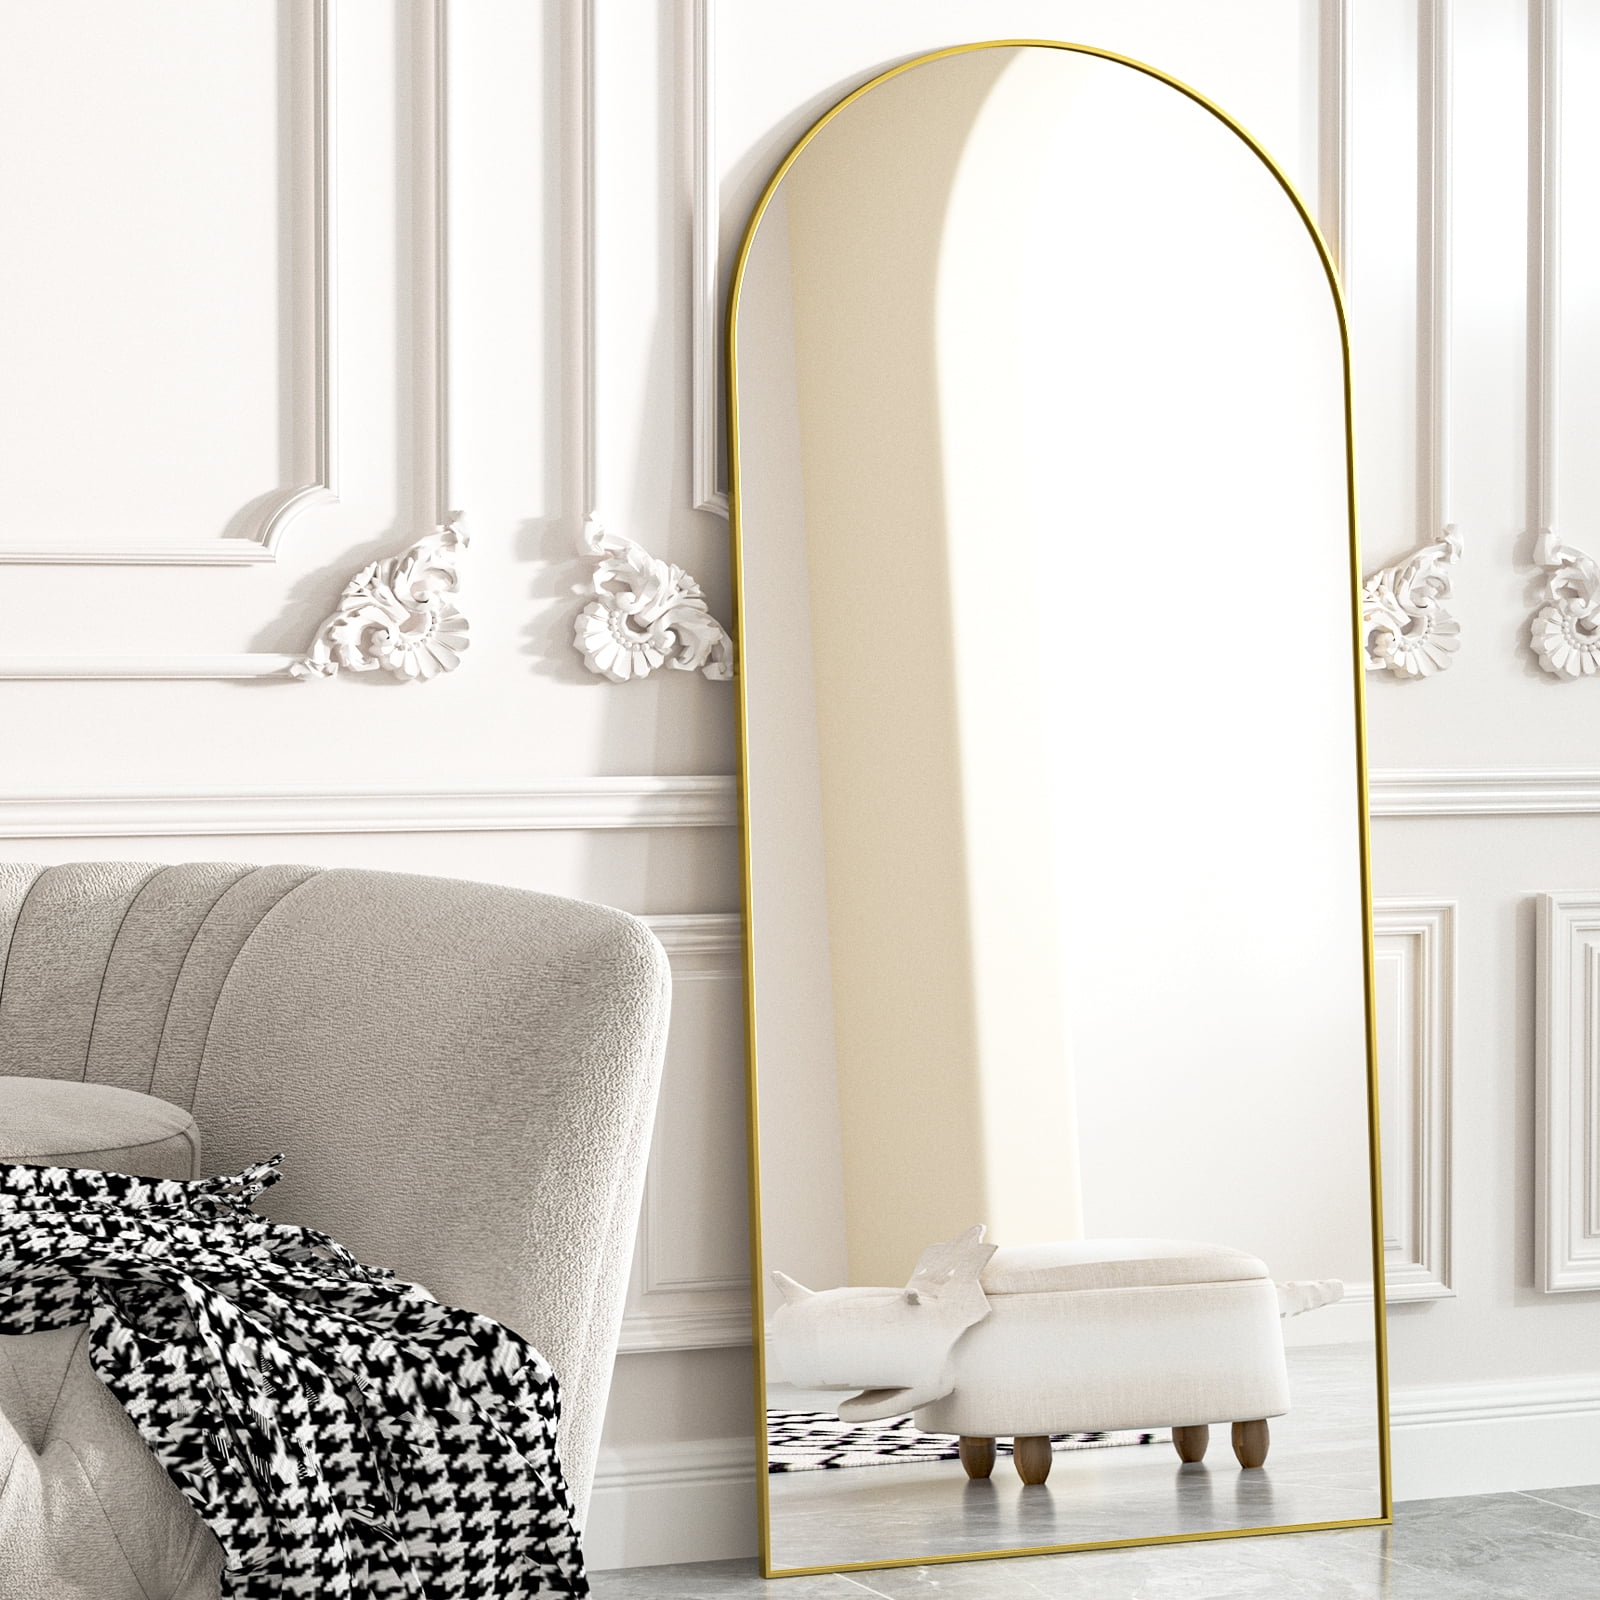 BEAUTYPEAK Arch Full Length Mirror 71"x30" Floor Mirrors for Standing Leaning, Gold